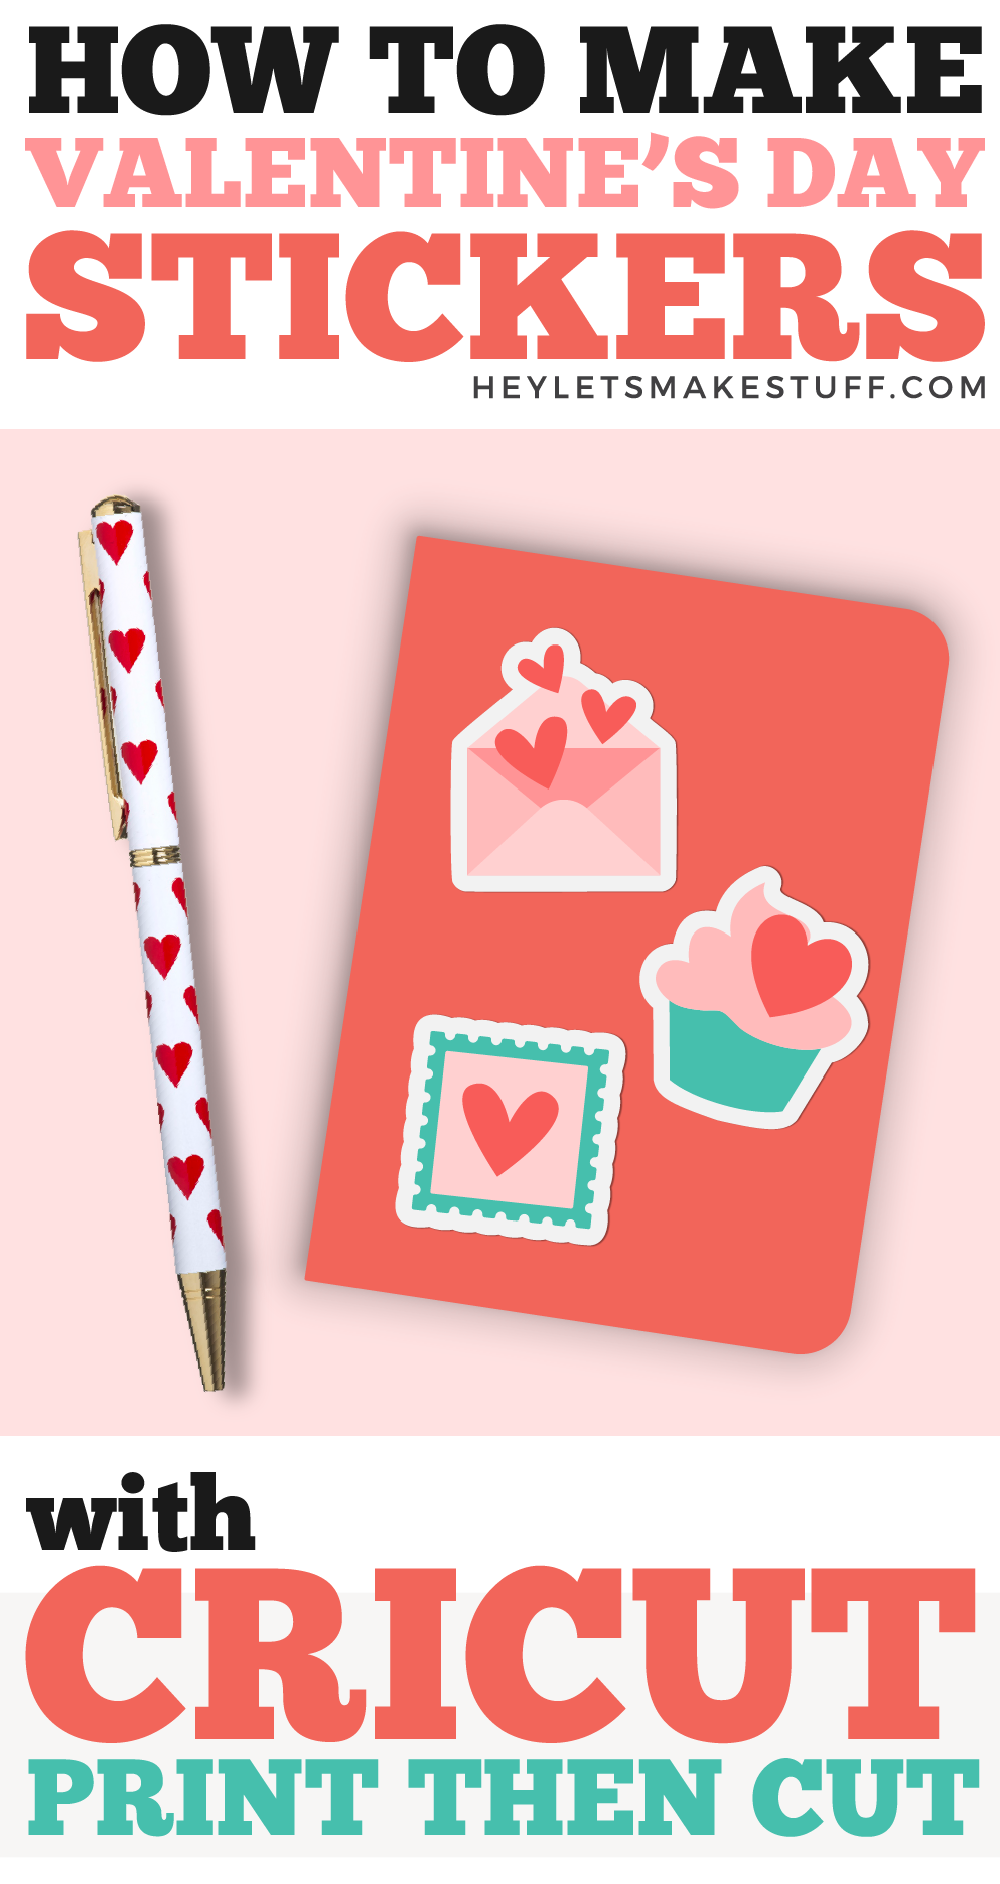 print-then-cut-valentine-s-day-stickers-hey-let-s-make-stuff